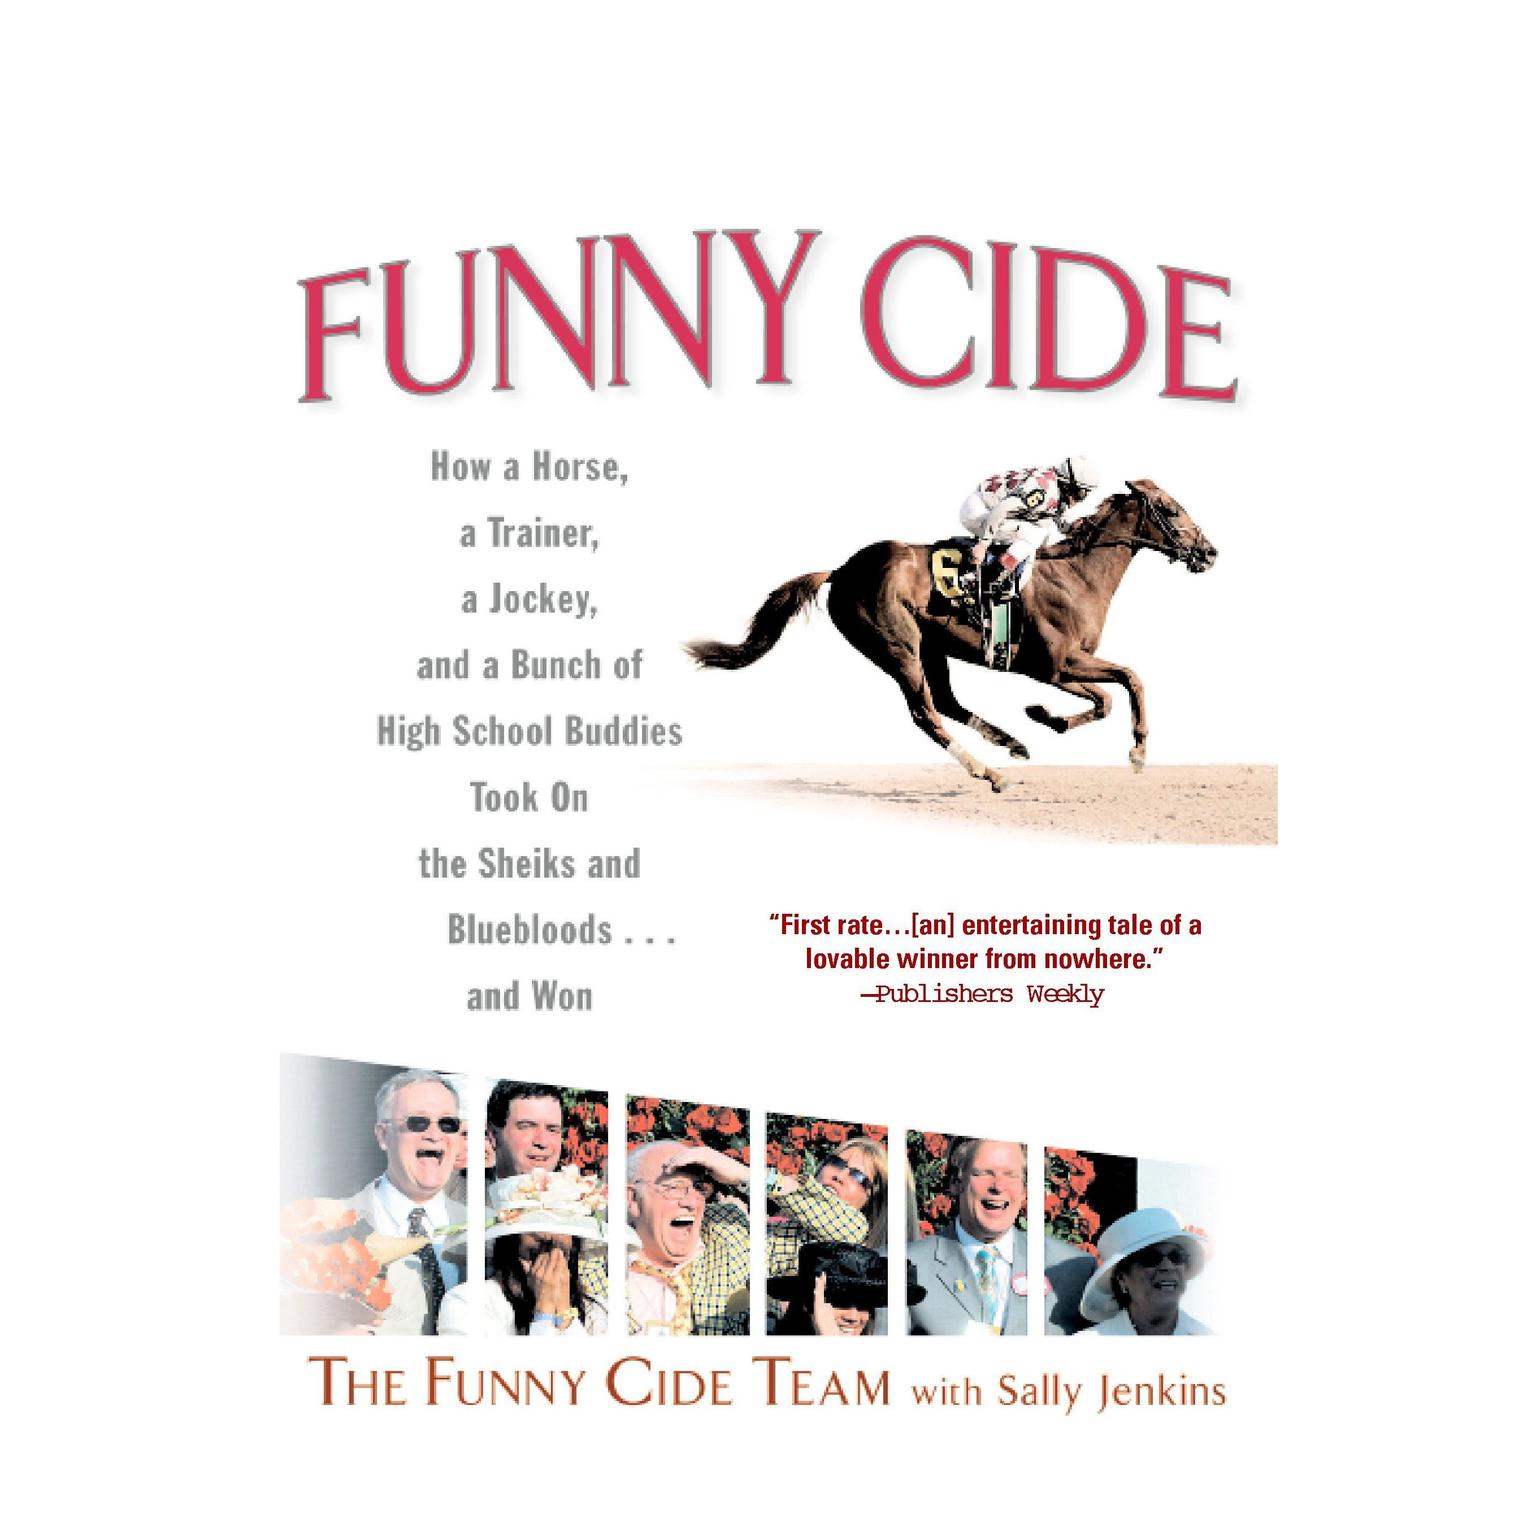 Funny Cide (Abridged): How a Horse, a Trainer, a Jockey, and a Bunch of High School Buddies Took on the Shieks and Bluebloods...and Won Audiobook, by Sally Jenkins